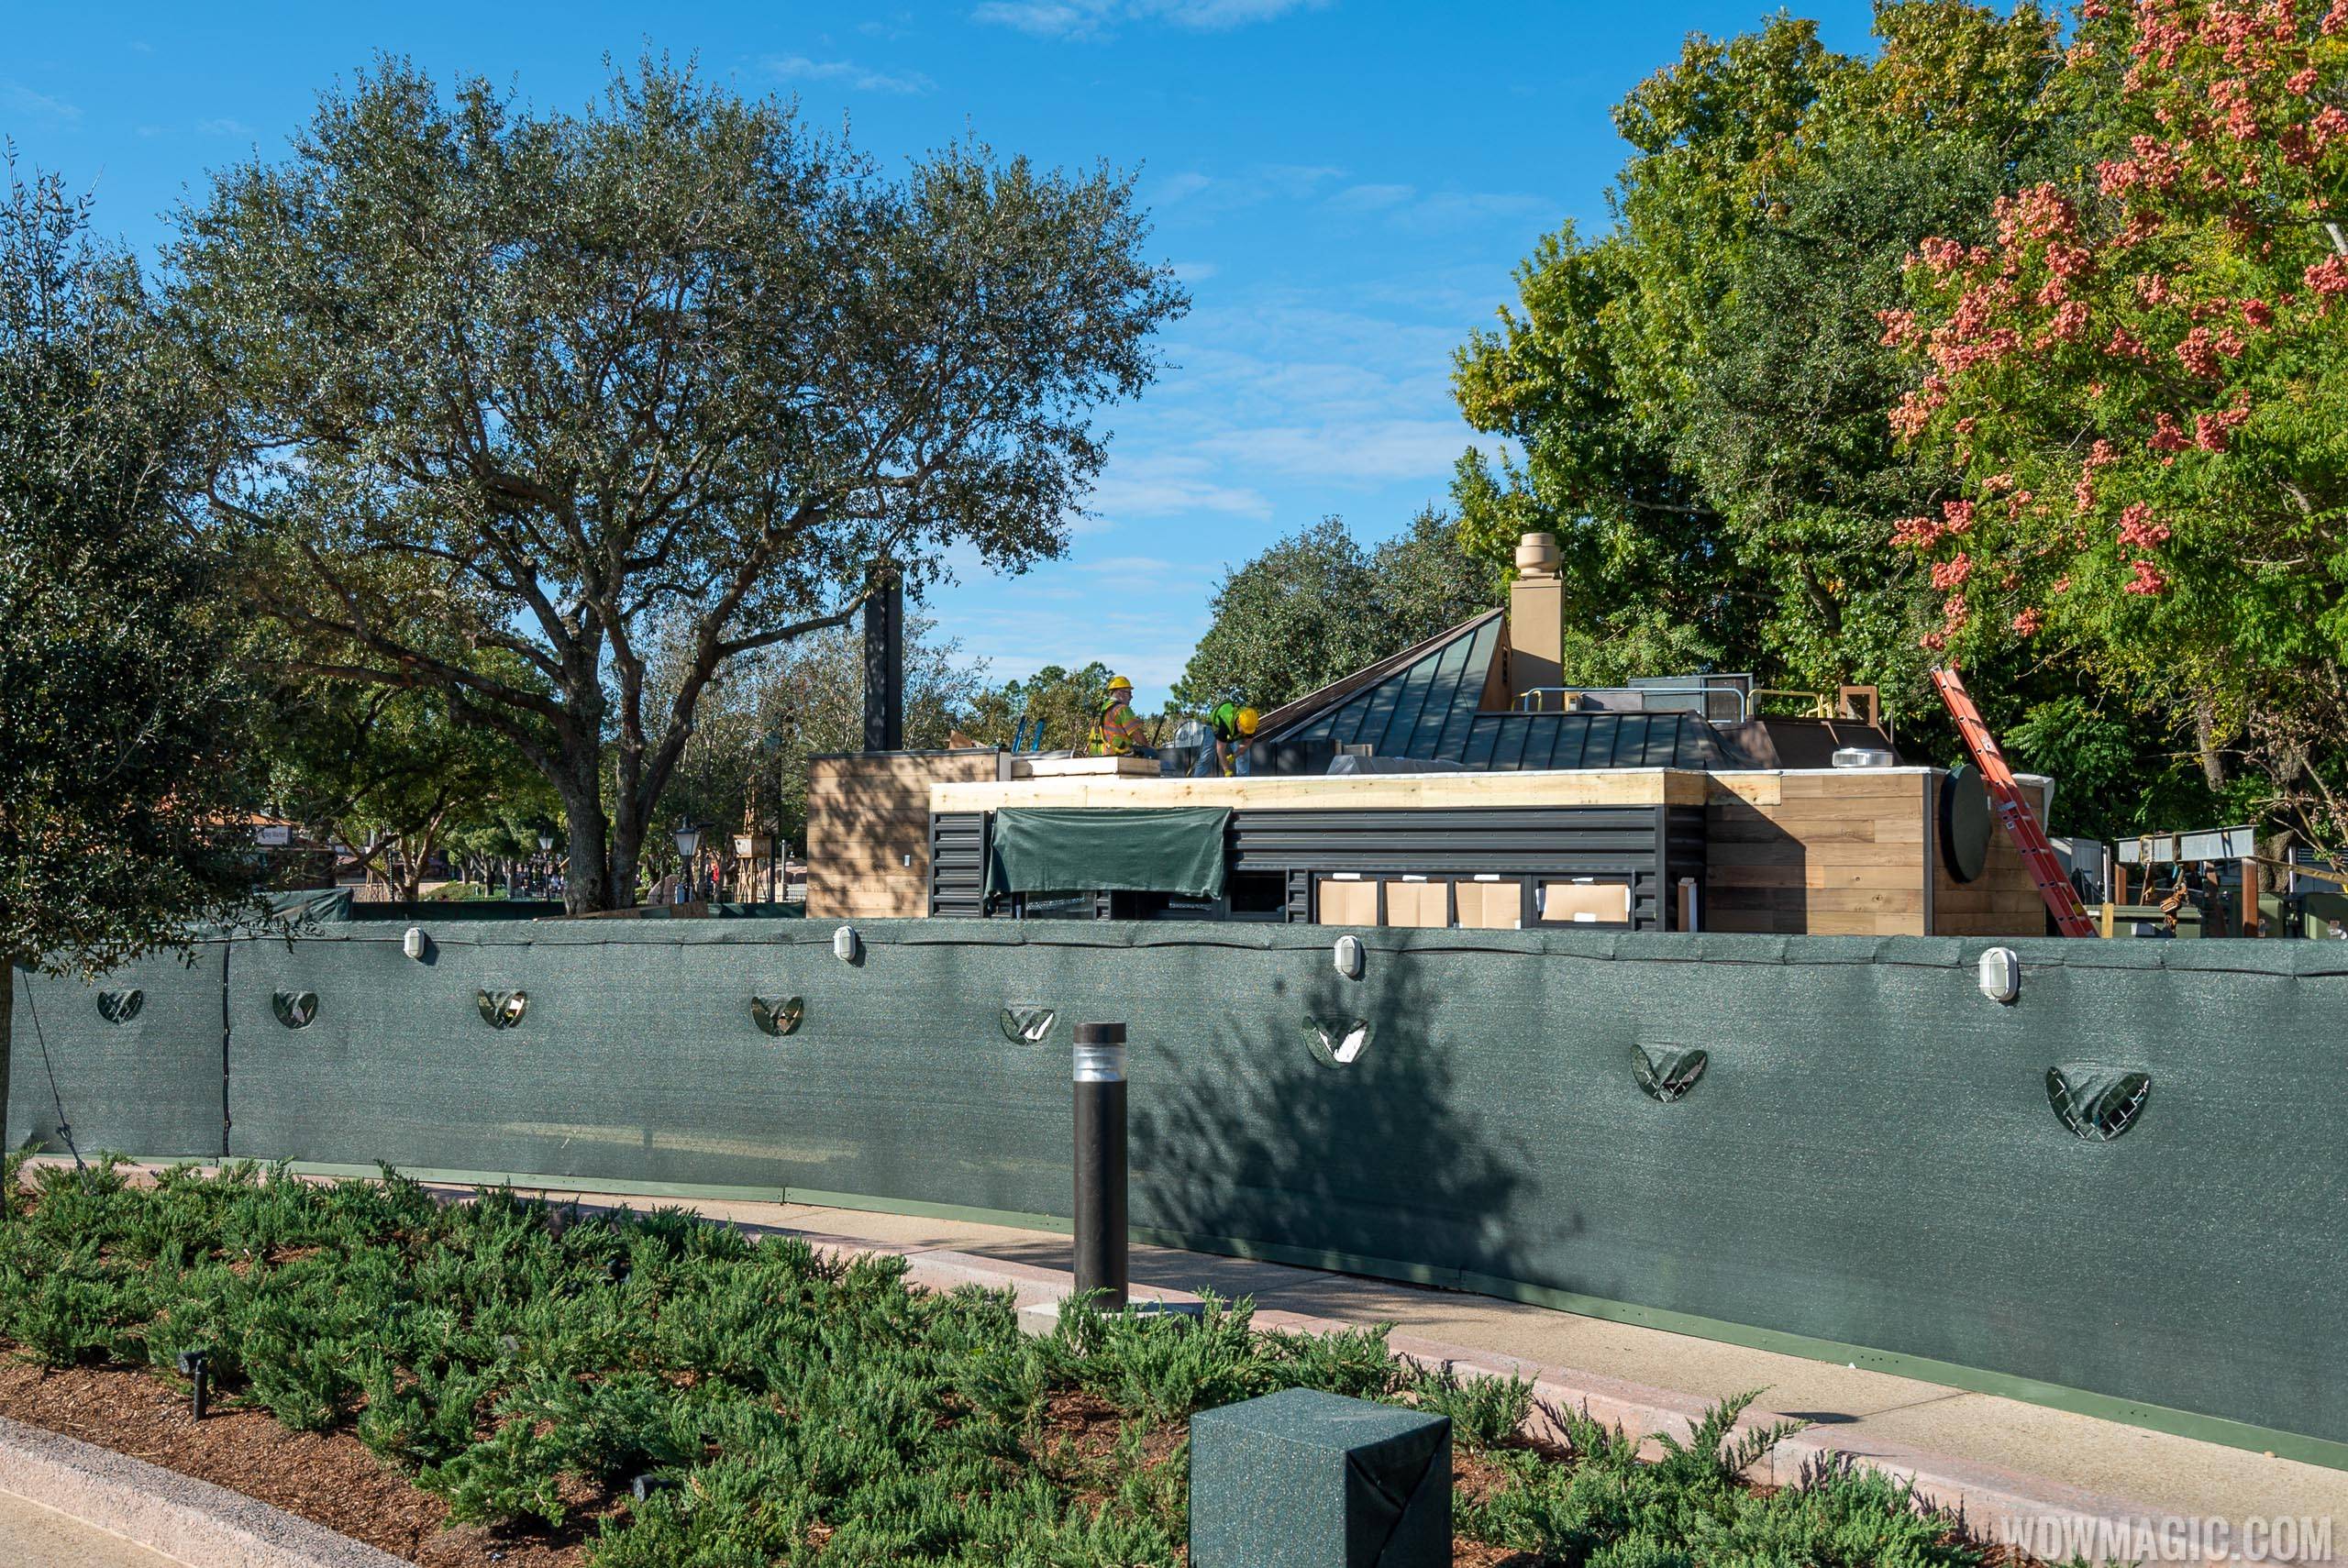 PHOTOS - Construction of the new Starbucks temporary location in World Showcase